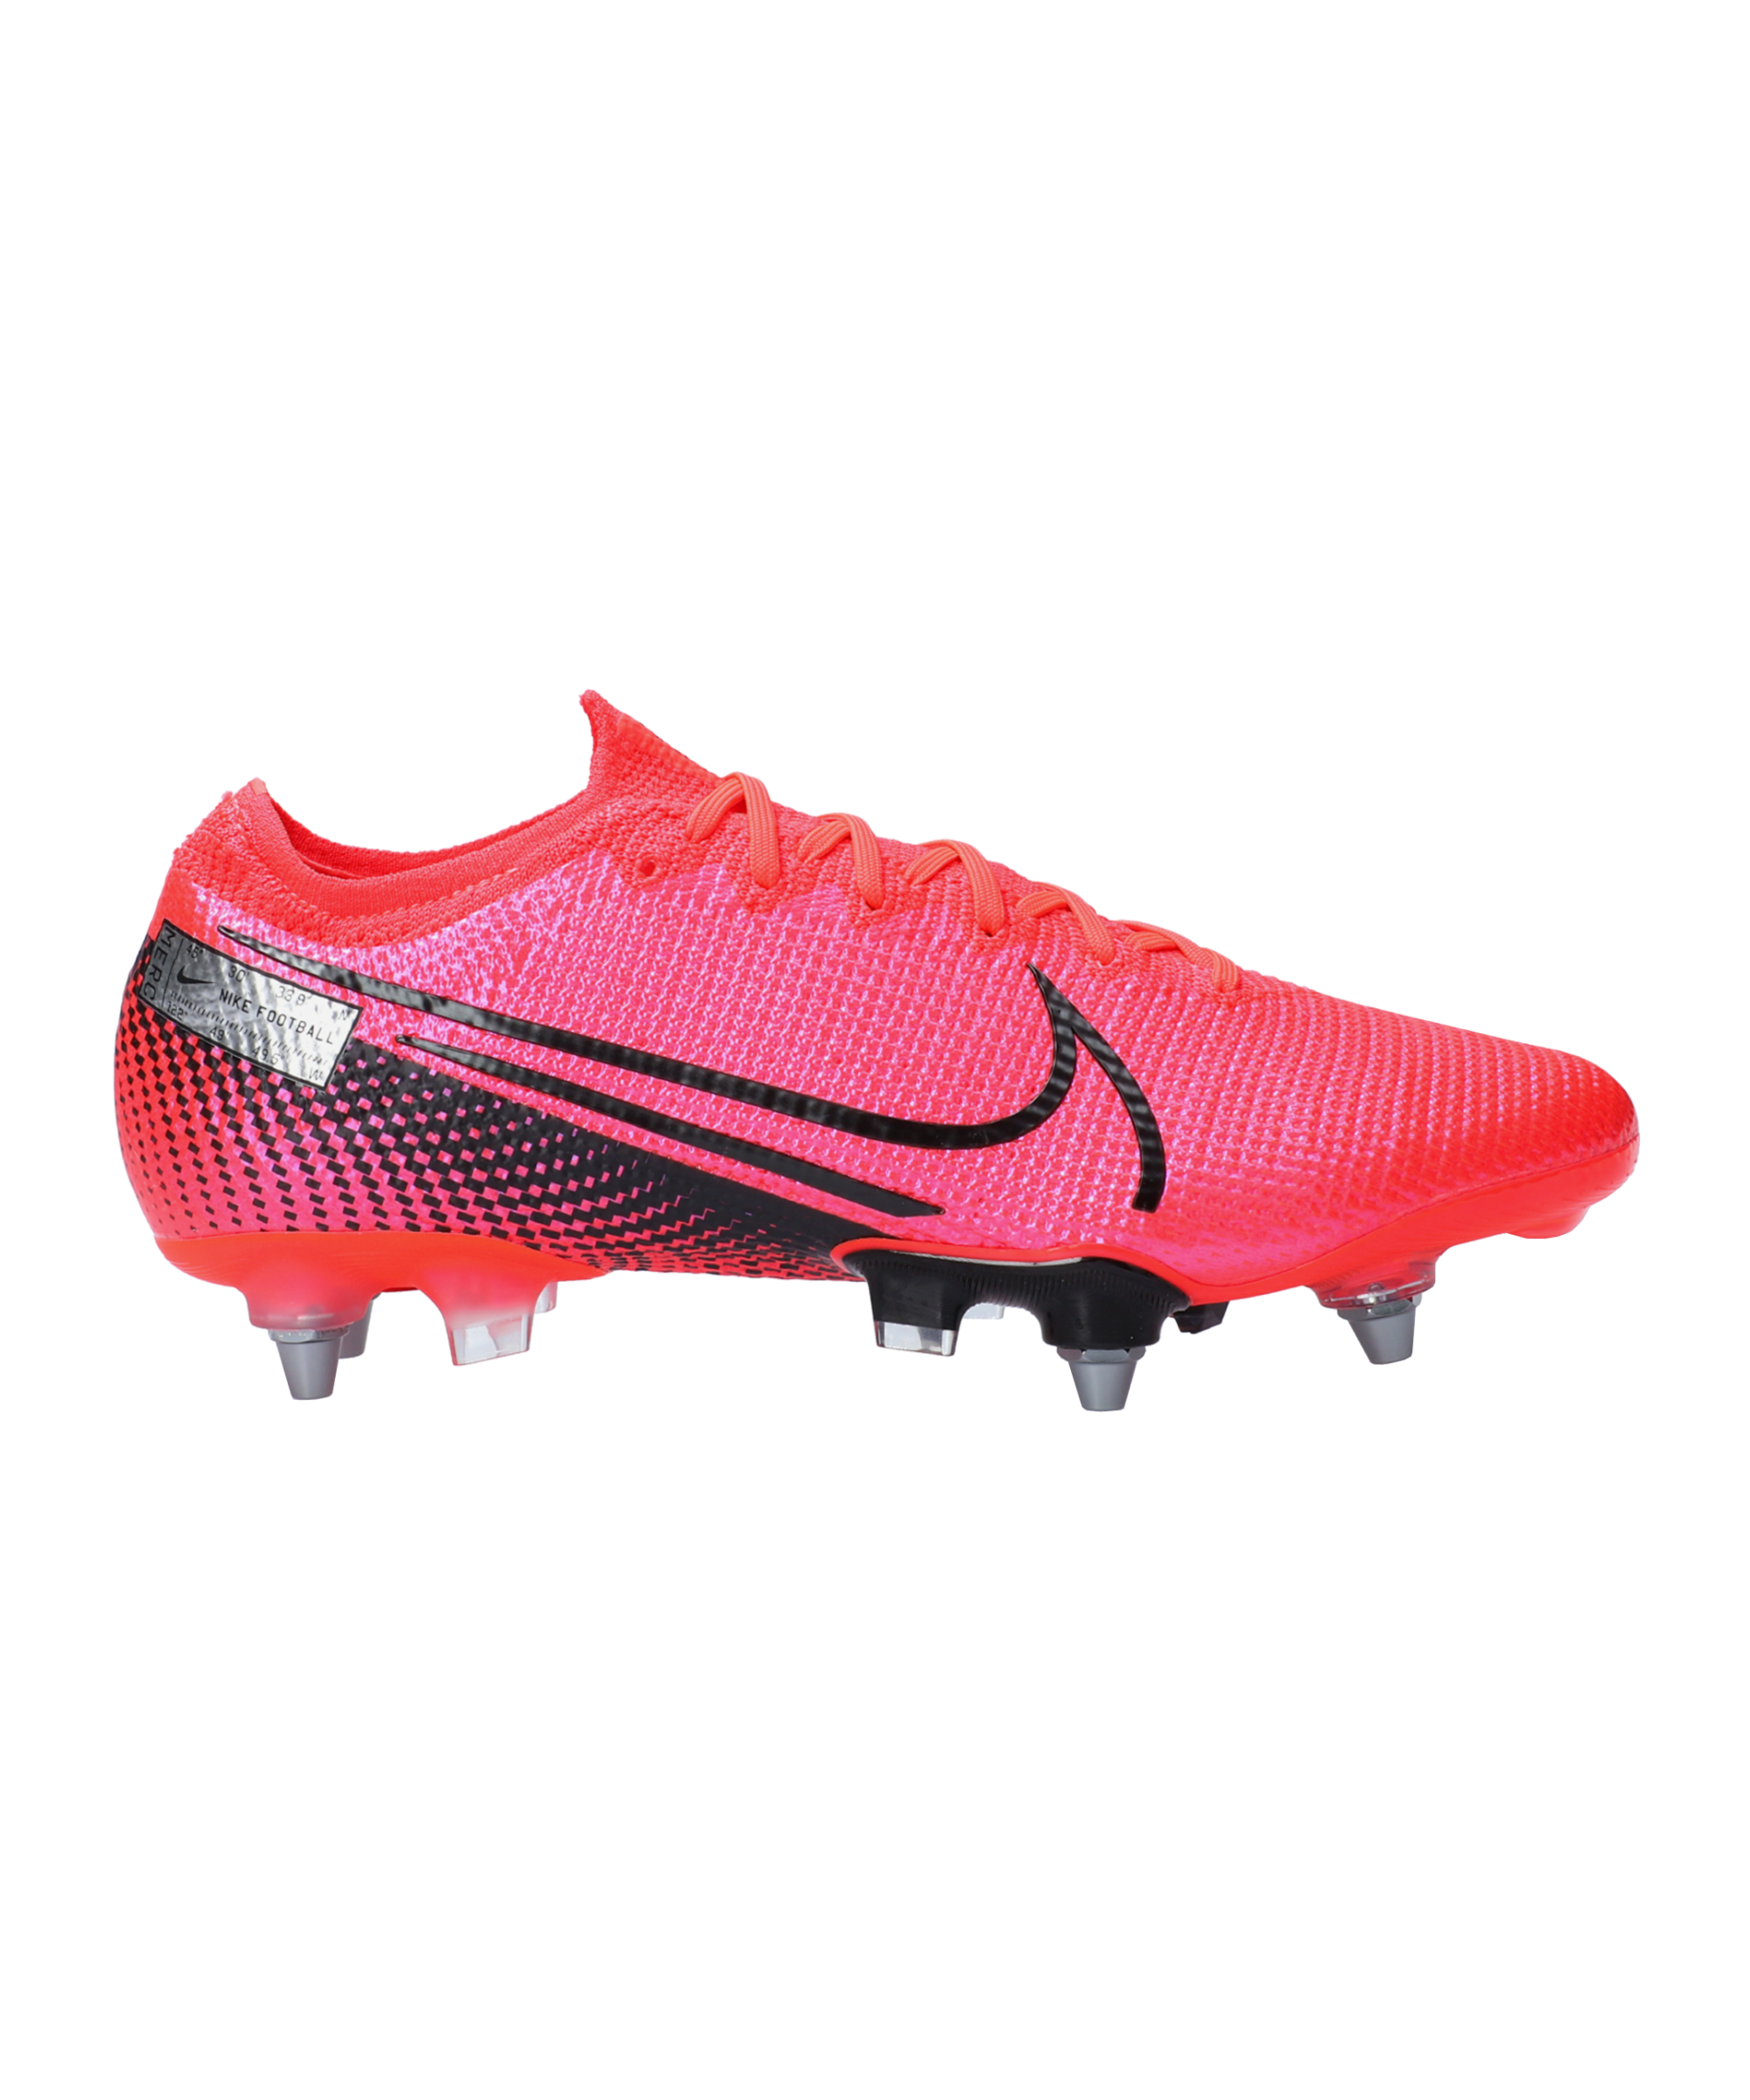 Nike Launch The Limited Edition Mercurial Vapor XIII SE - SoccerBible